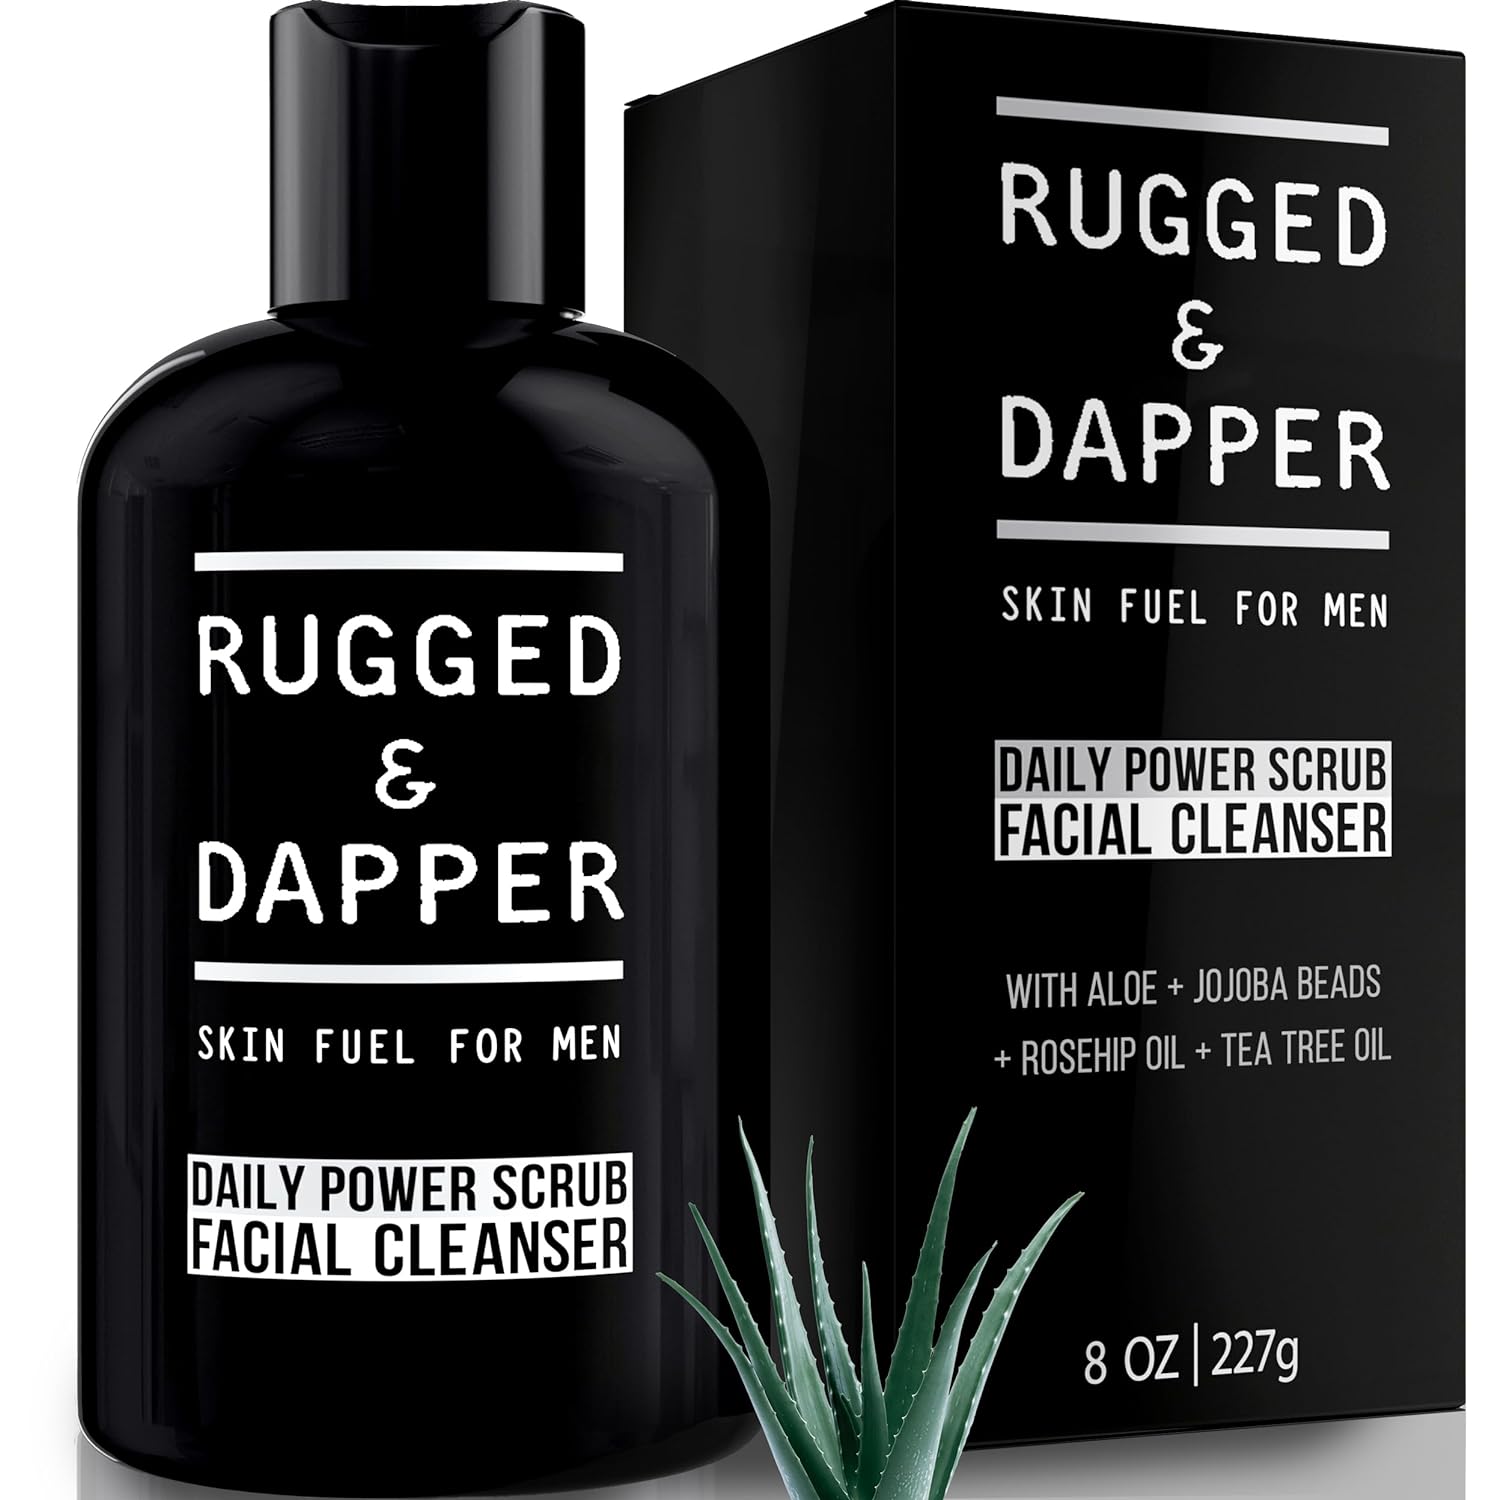 RUGGED & DAPPER - Premium Mens Face Wash, 2-in-1 Mens Face Scrub and Face Wash for Men, Daily Exfoliating Men's Face Wash with Organic Aloe and Jojoba, Hydrating Face Cleanser for Men - 8 Oz